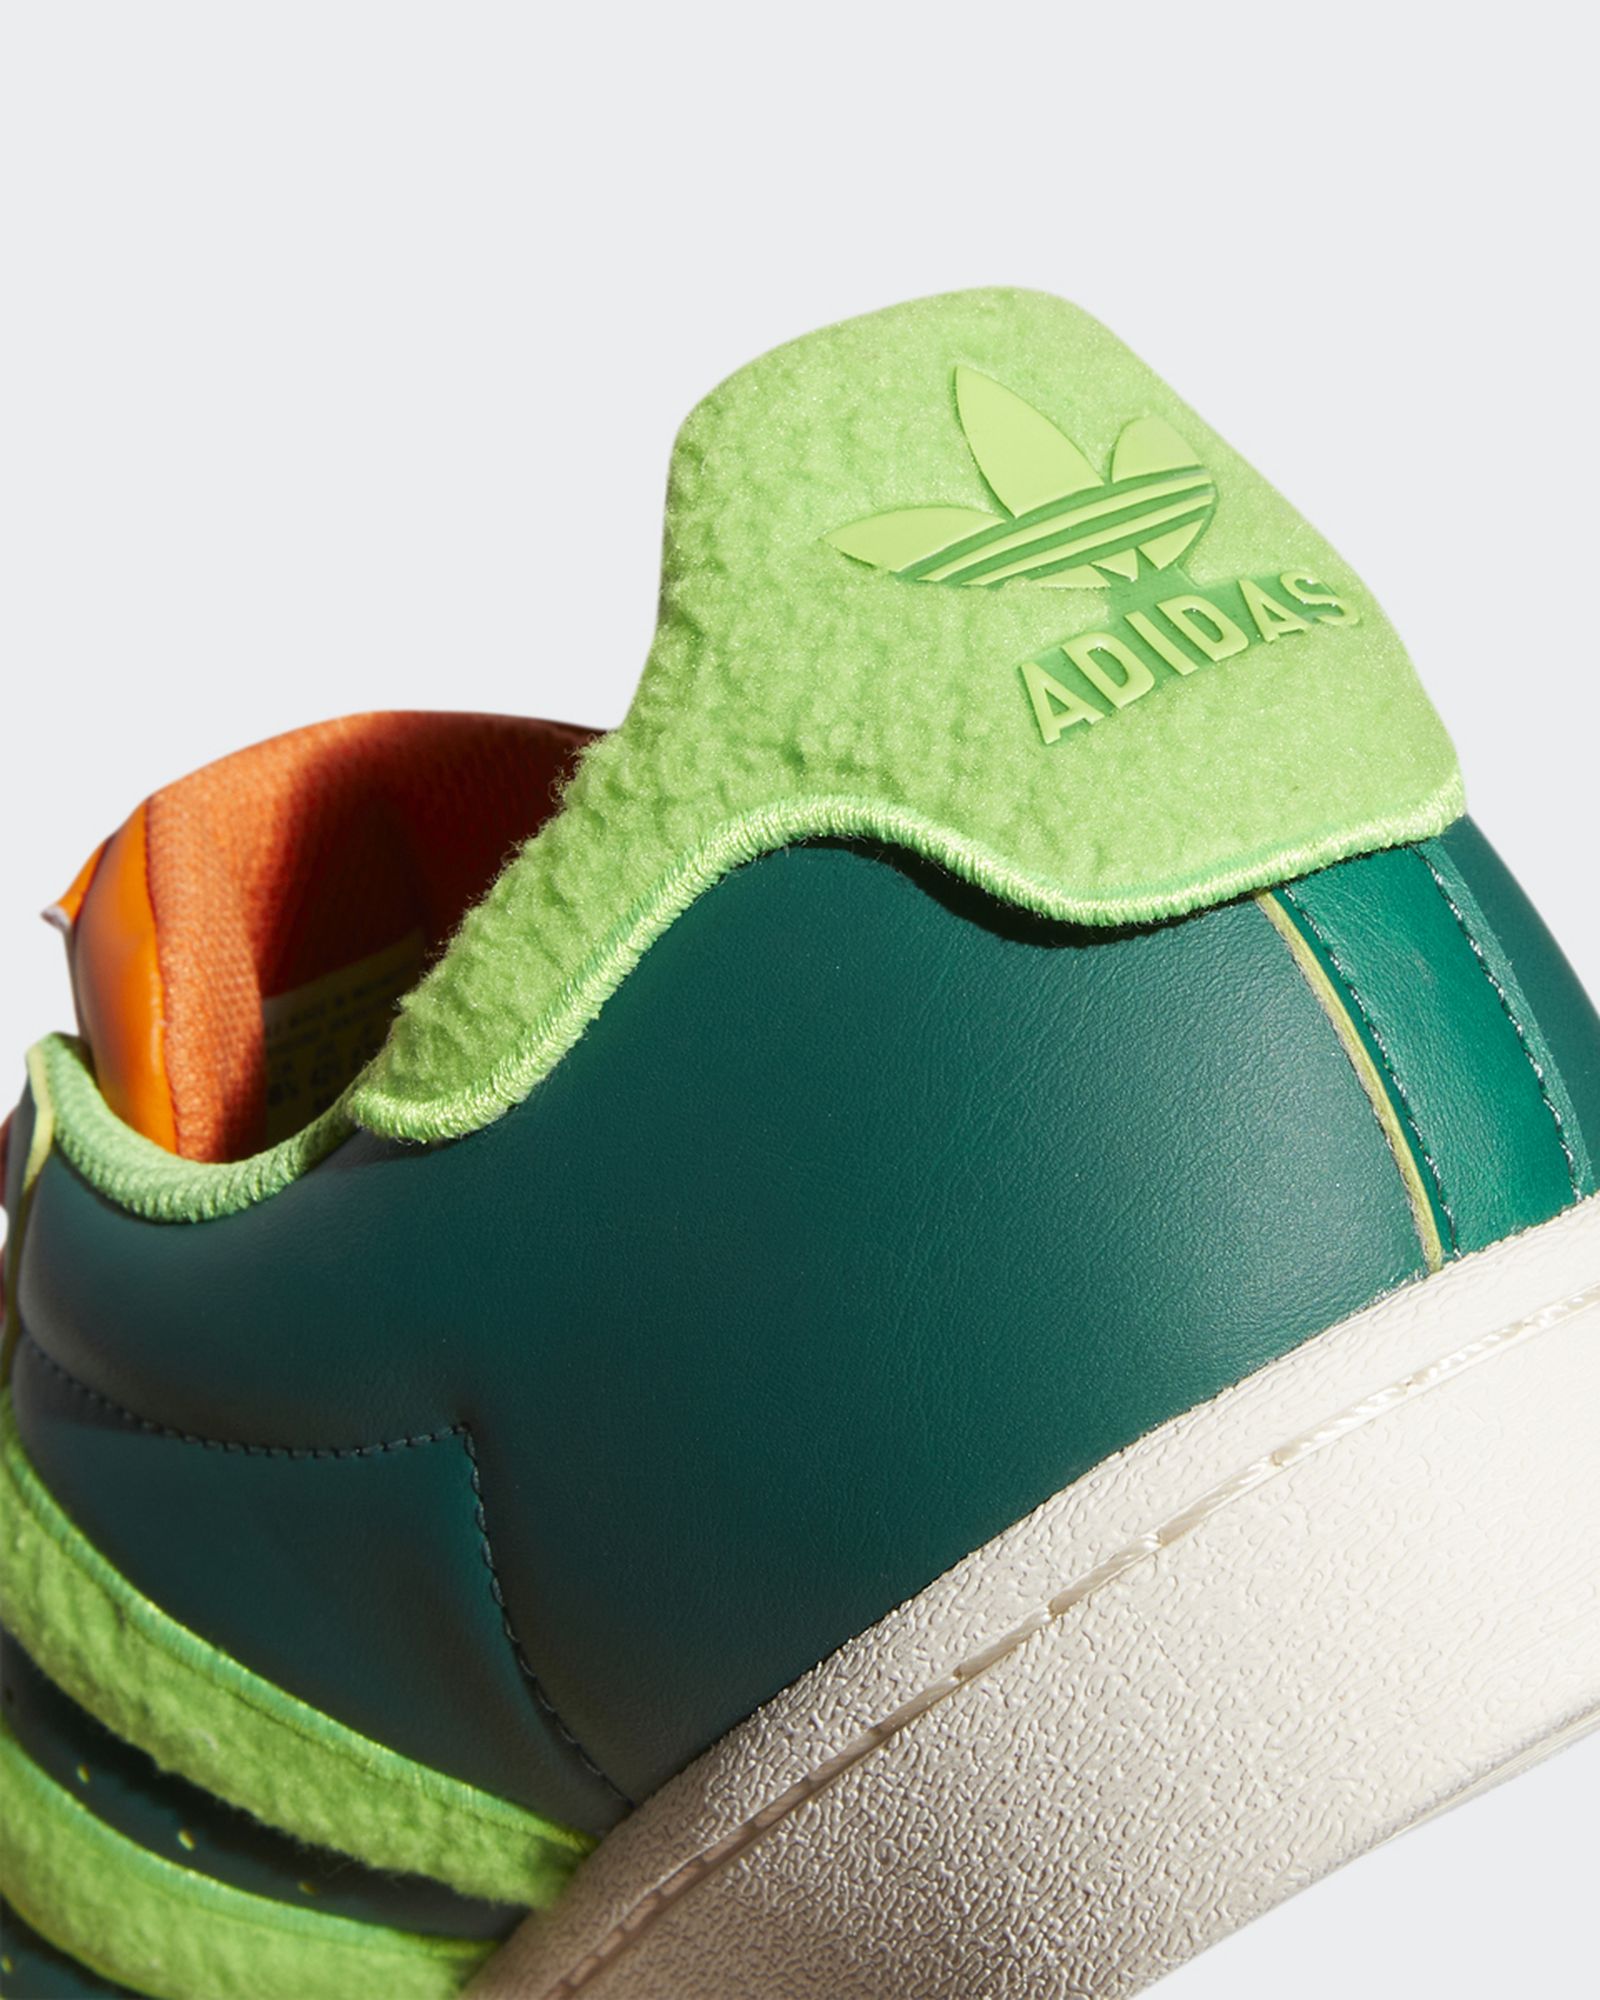 south-park-adidas-shoes-release-date-collection (42)